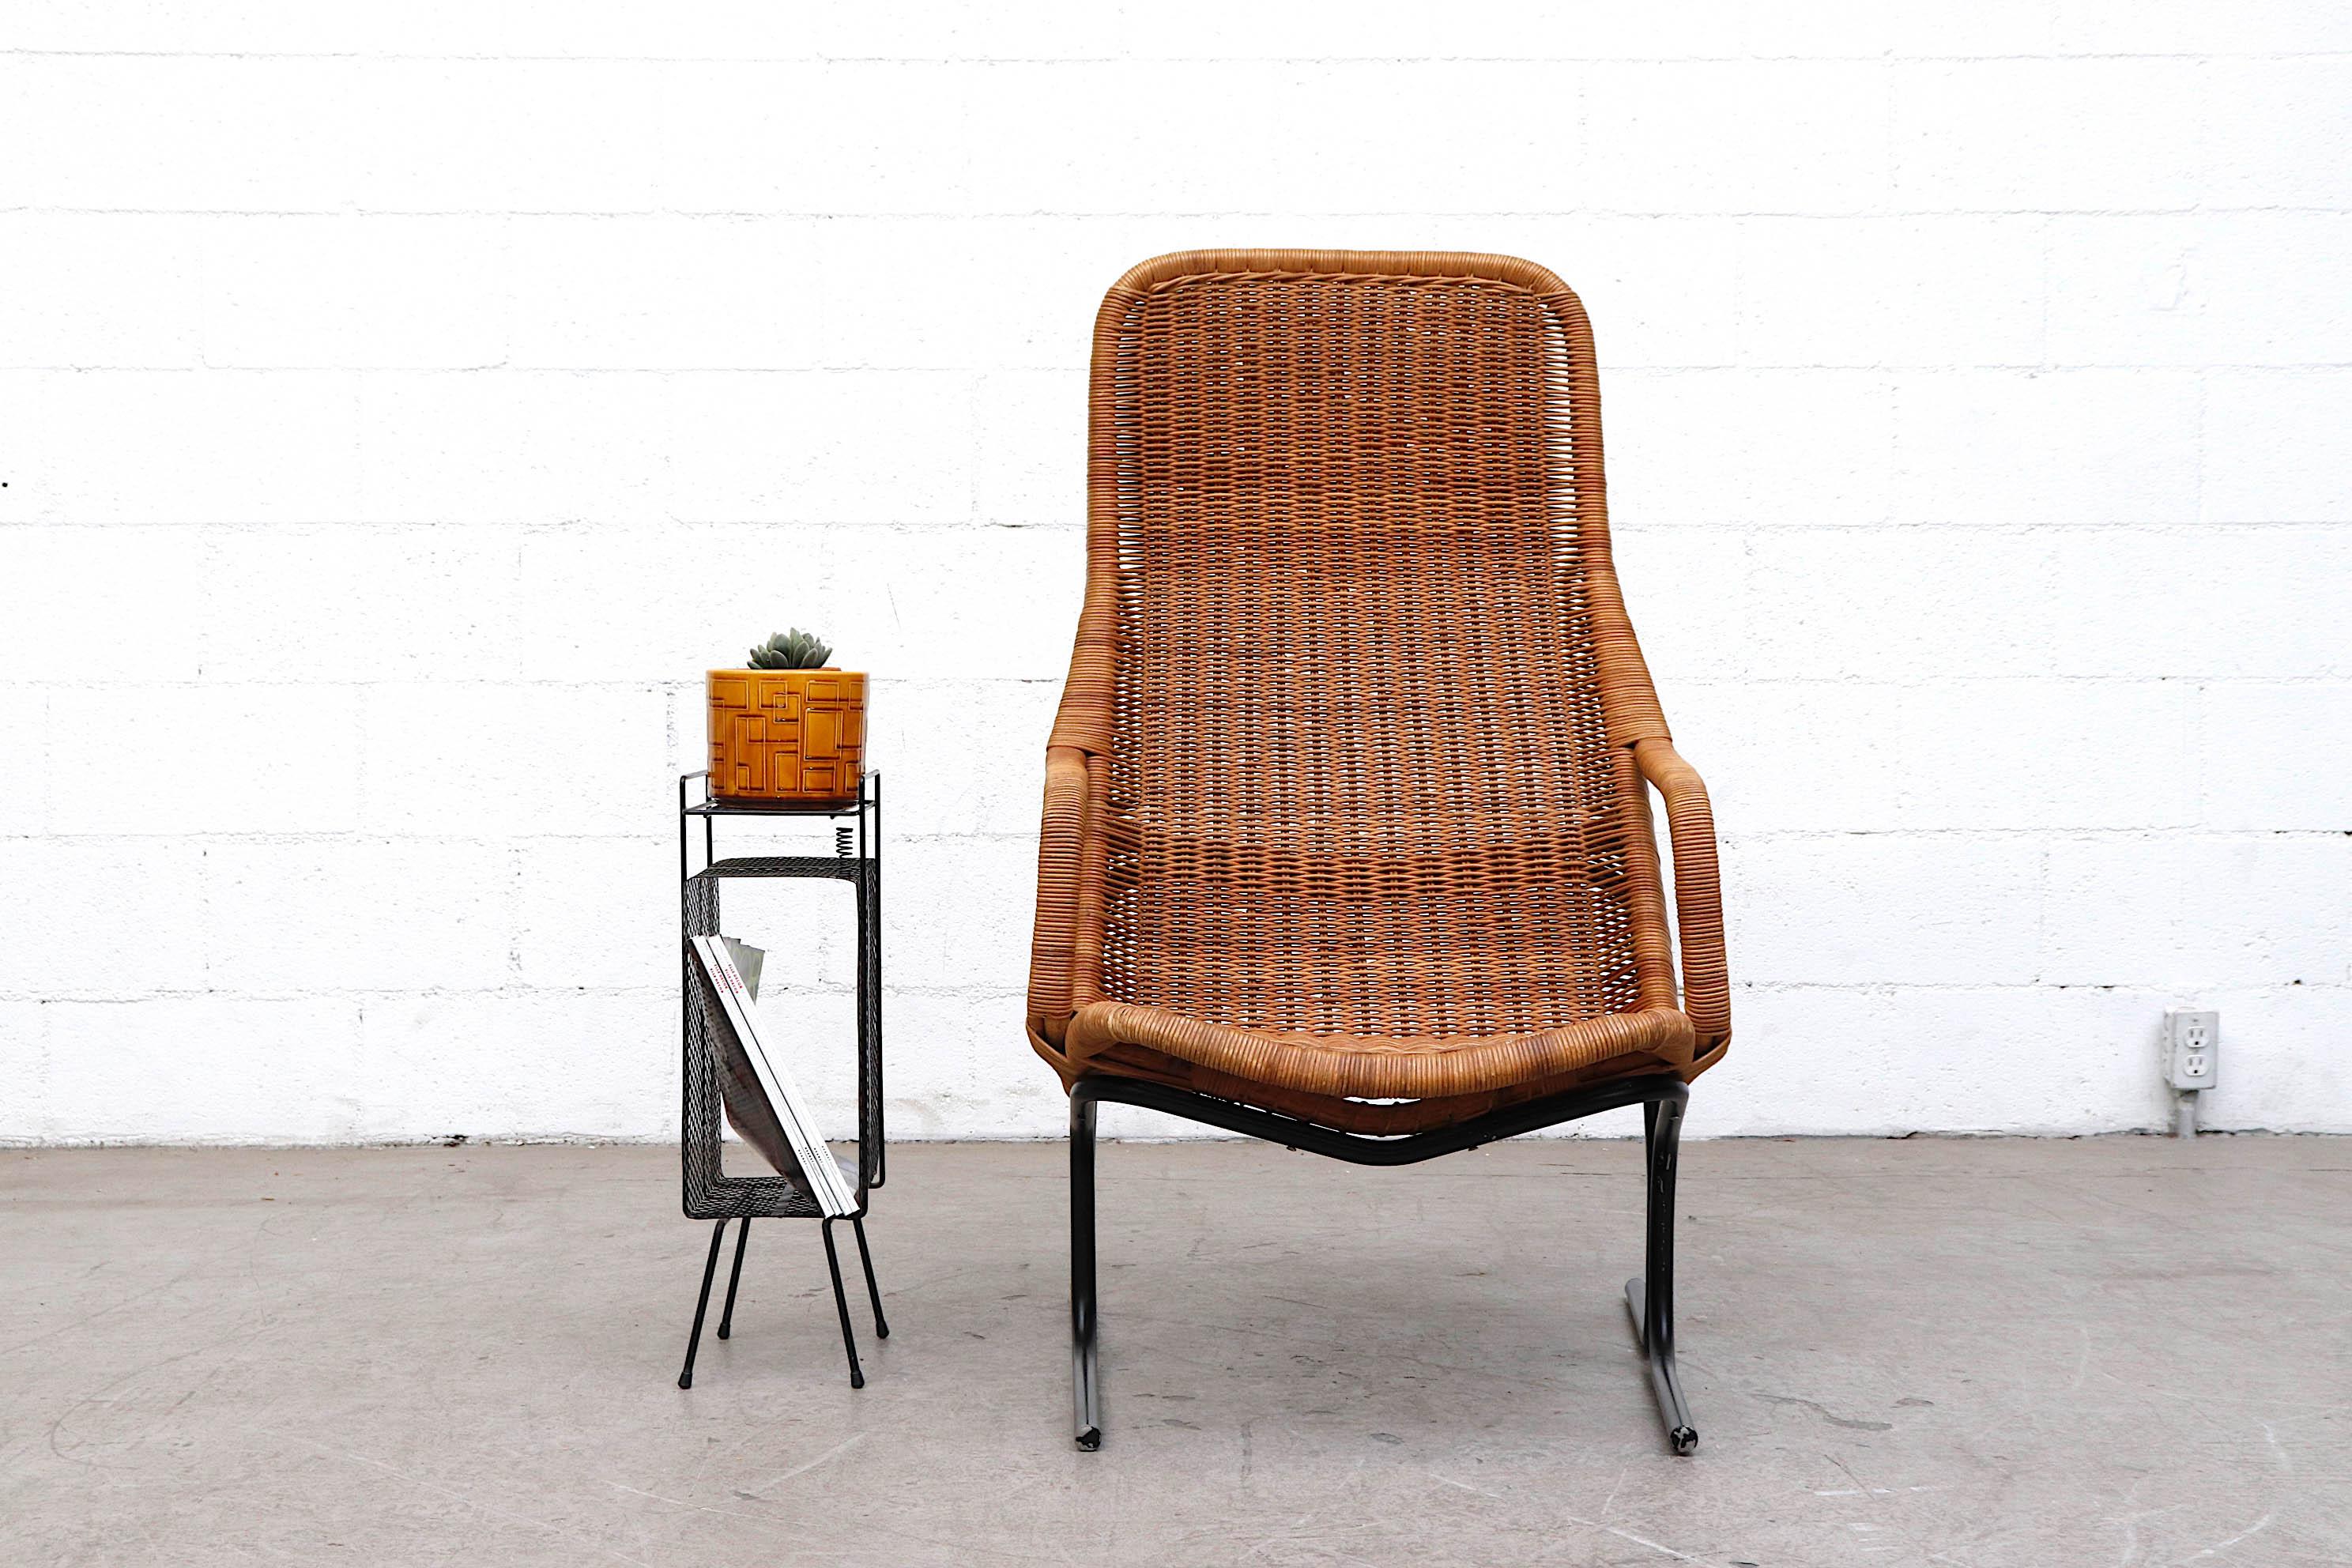 Beautiful midcentury high back woven rattan lounge chair with black enameled metal tubular frame and head cushion in original condition. Visible signs of wear with minimal rattan loss. Shown with cute little Mategot inspired side table.